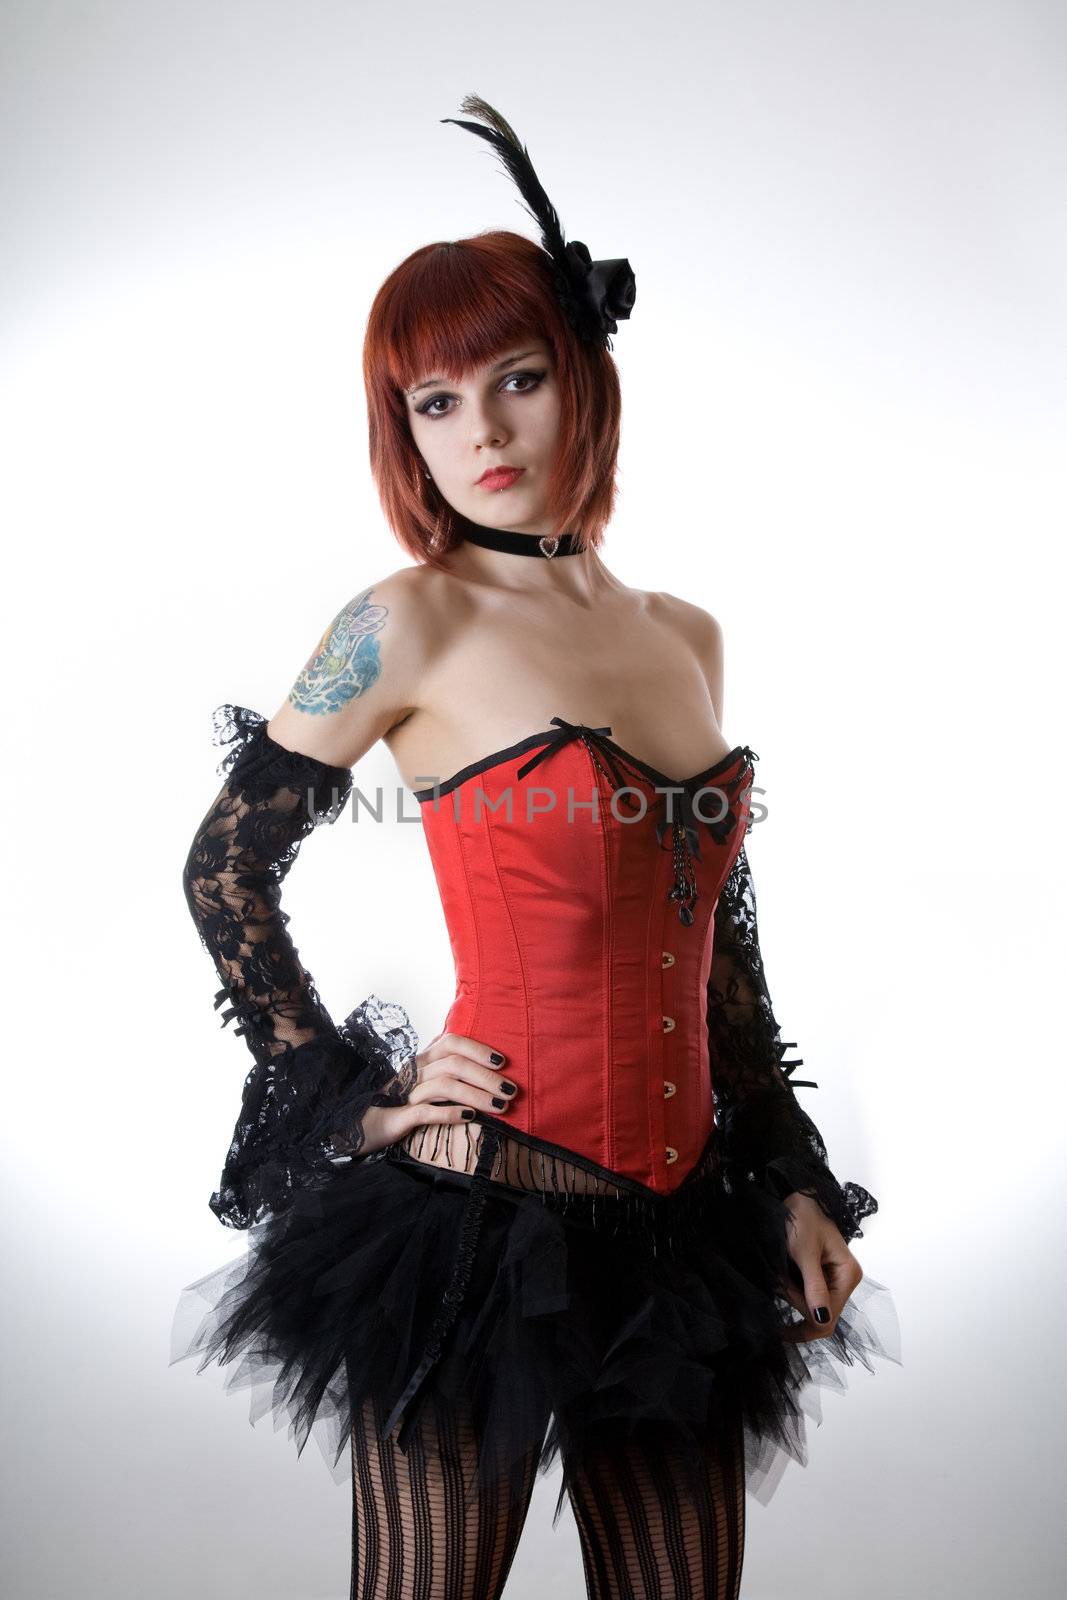 Cabaret girl in red corset  by Elisanth